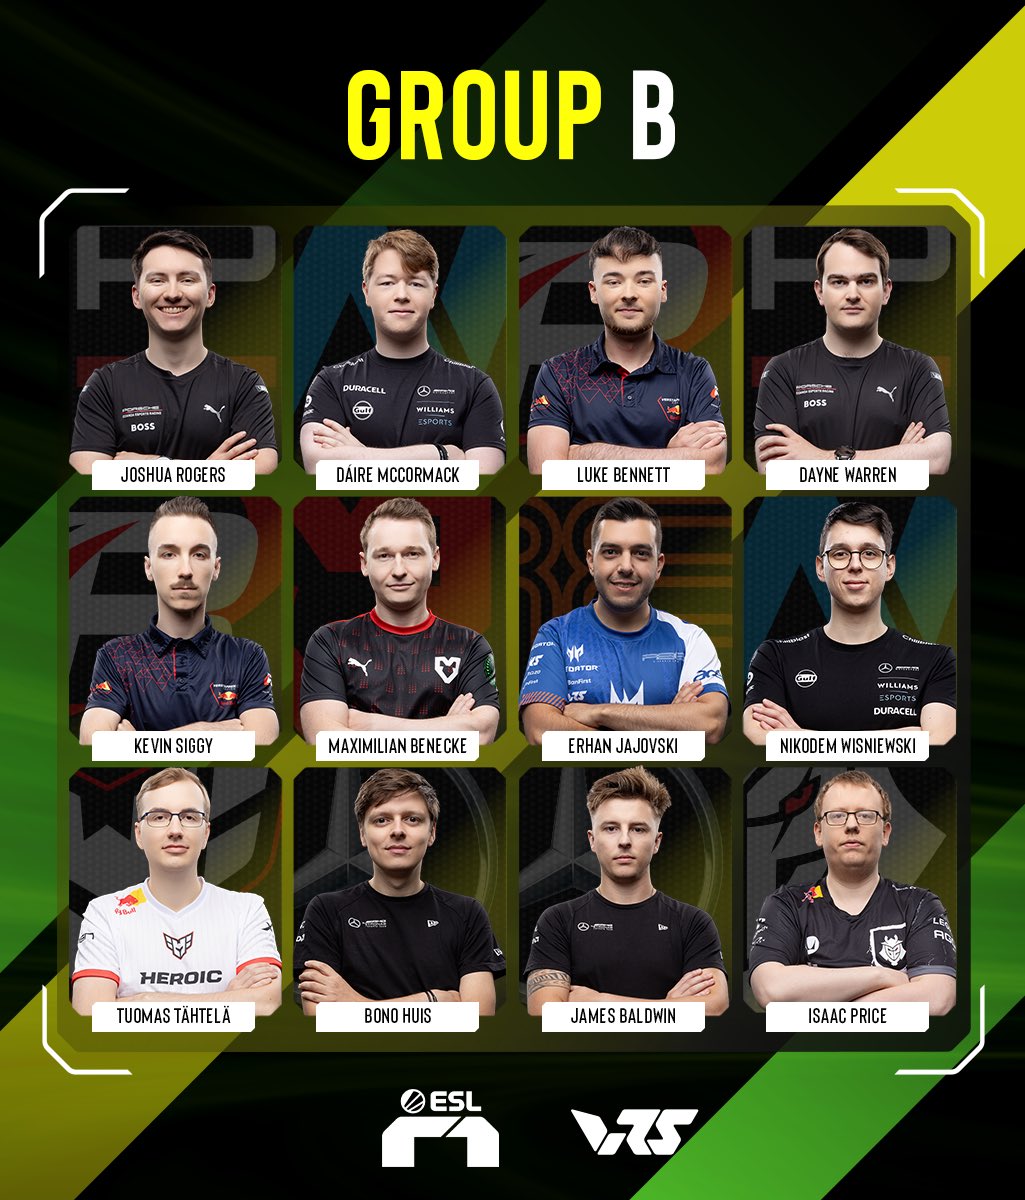 Our groups for Day 1 of the ESL R1 Major 👀👇 Group A will be all about teamwork but also avoiding stepping on each others toes for @r8gesports and @apexracingteam who both have 3 drivers on the grid 😳 Can the teammates help each other through to Day 2?